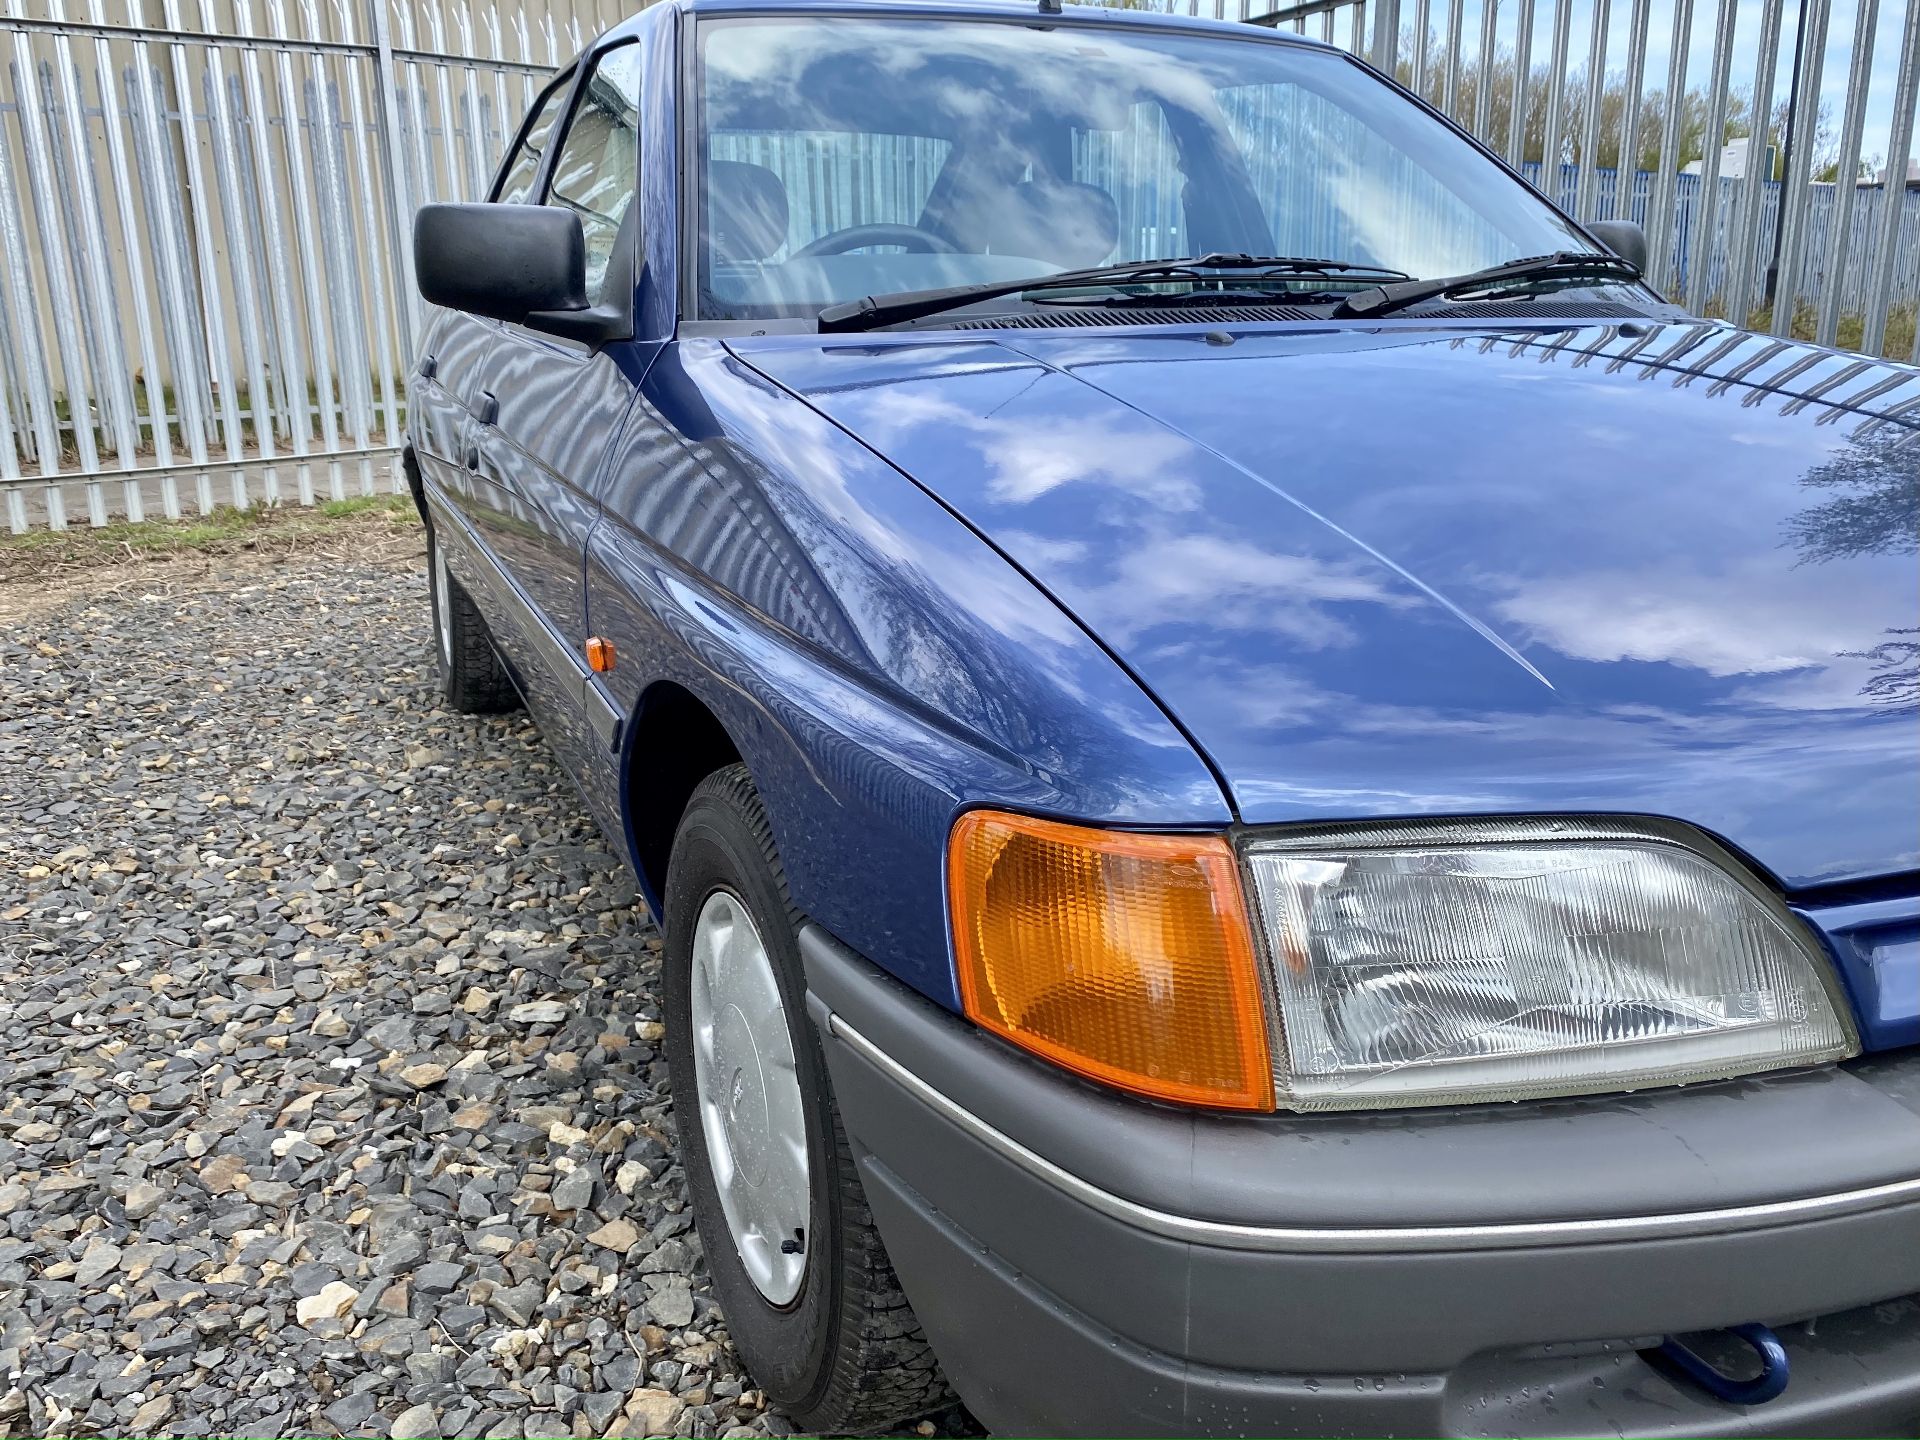 Ford Escort LX1.4 - Image 24 of 54